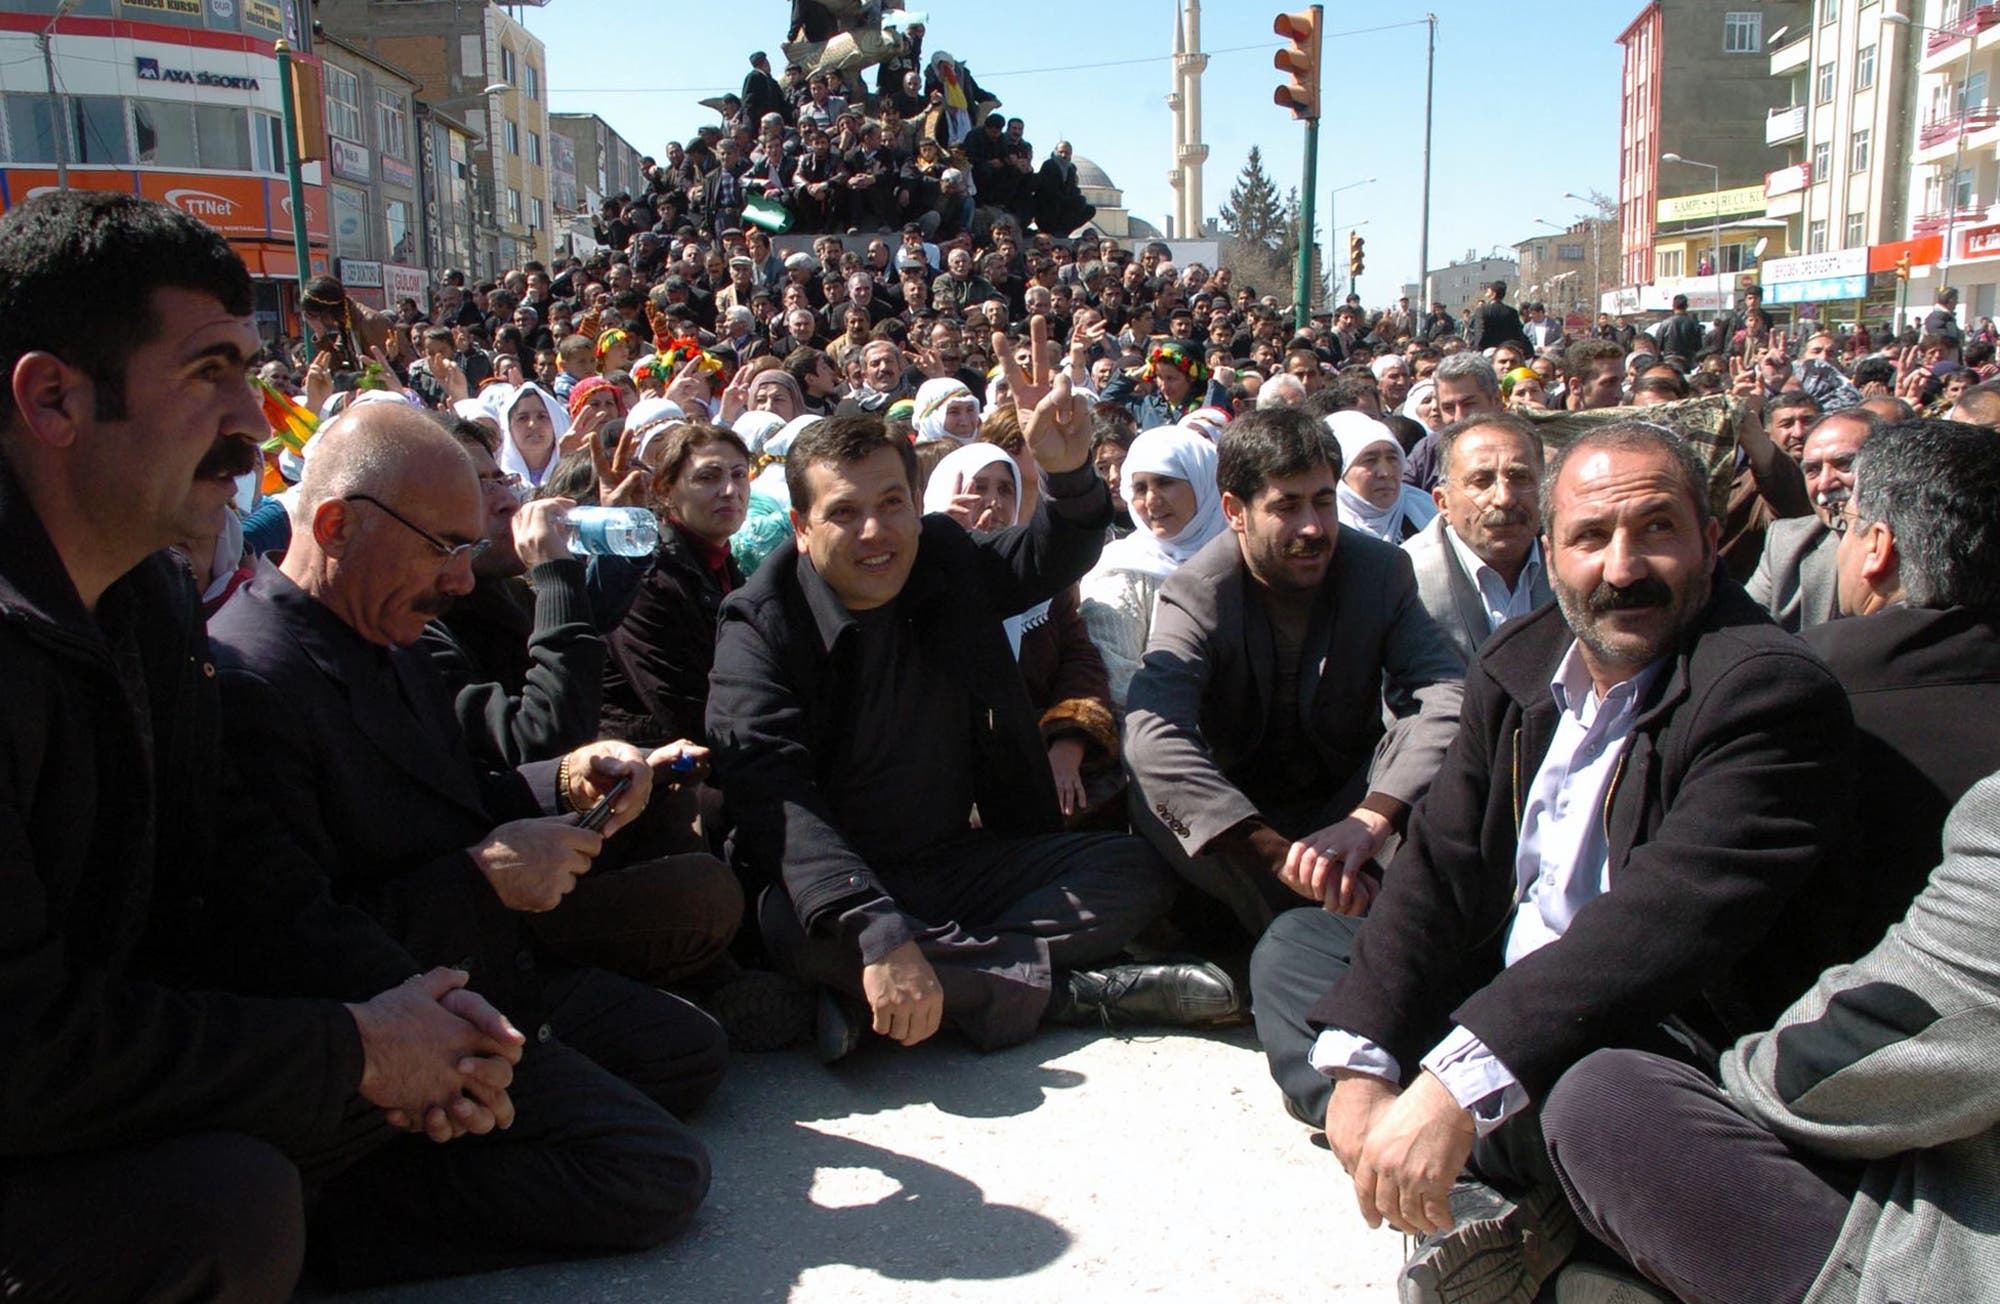 Kurdish activists and politicians occupy a main road as the part of their civil disobedience campaign in Van, Turkey on March 26, 2011. (AP)